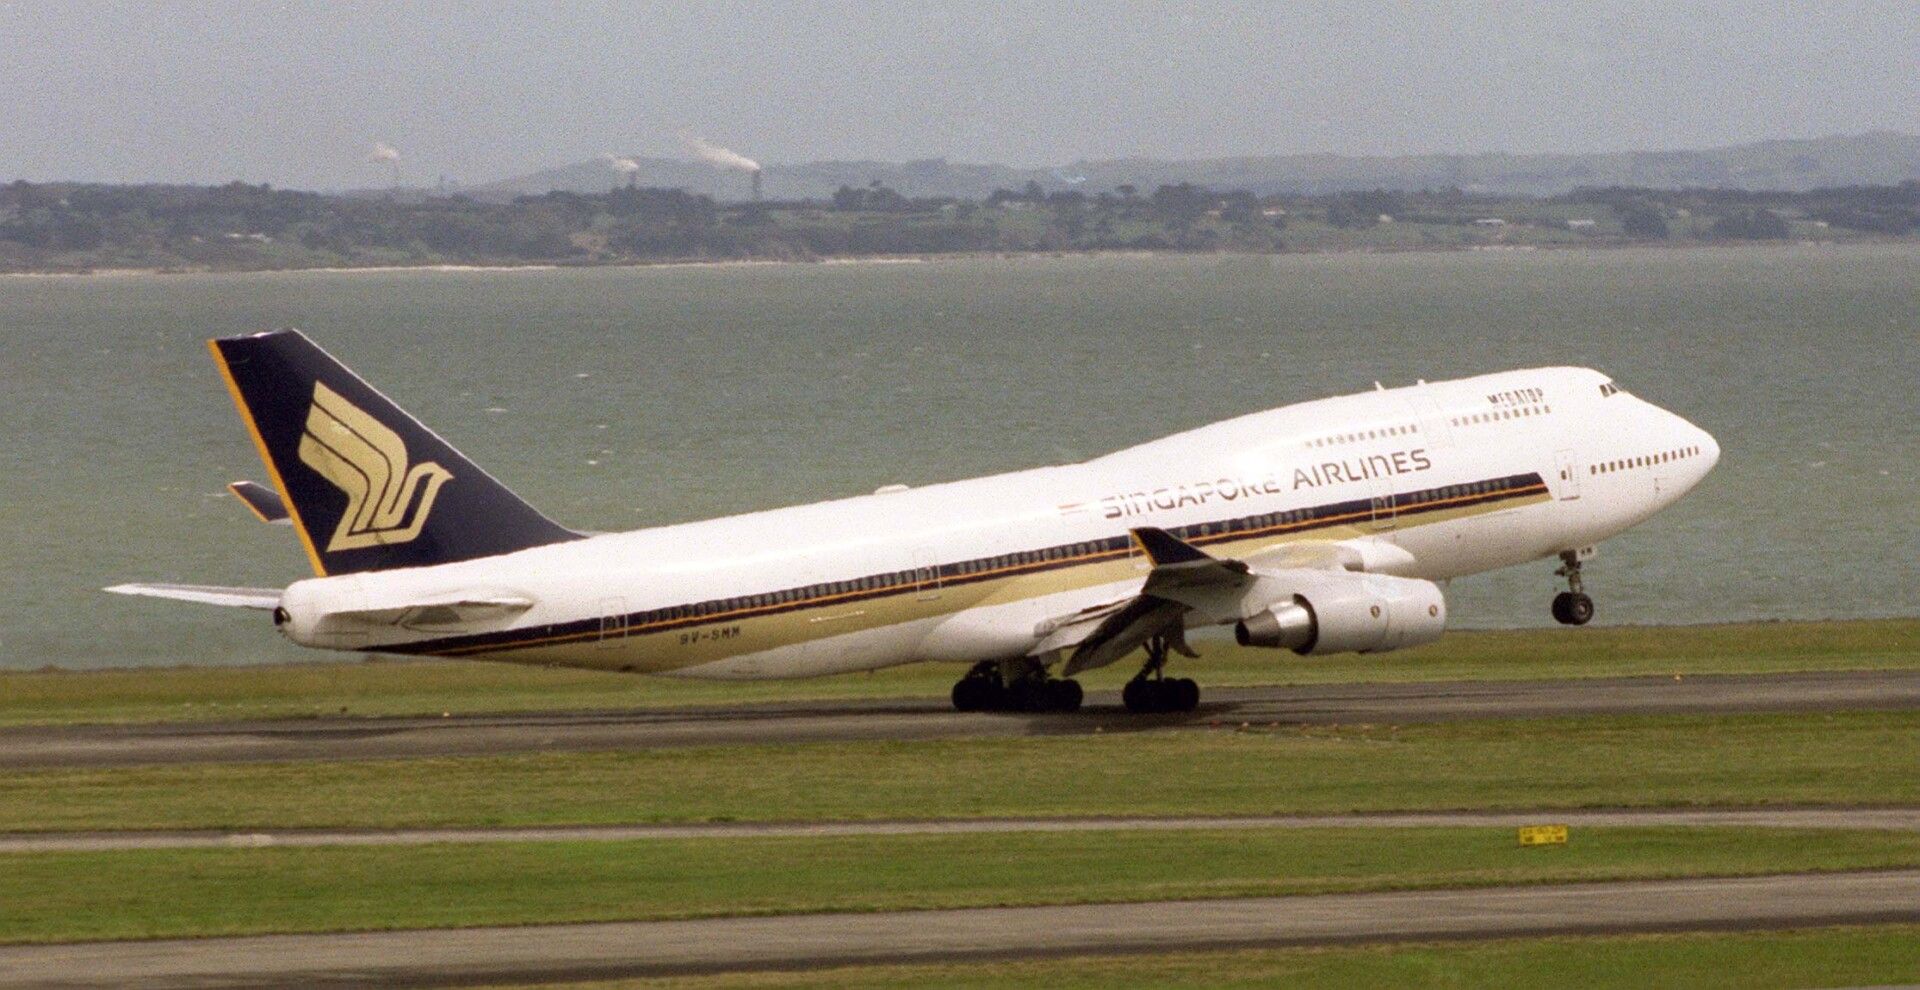 A Singapore Airlines Boeing 747 400 takes off from